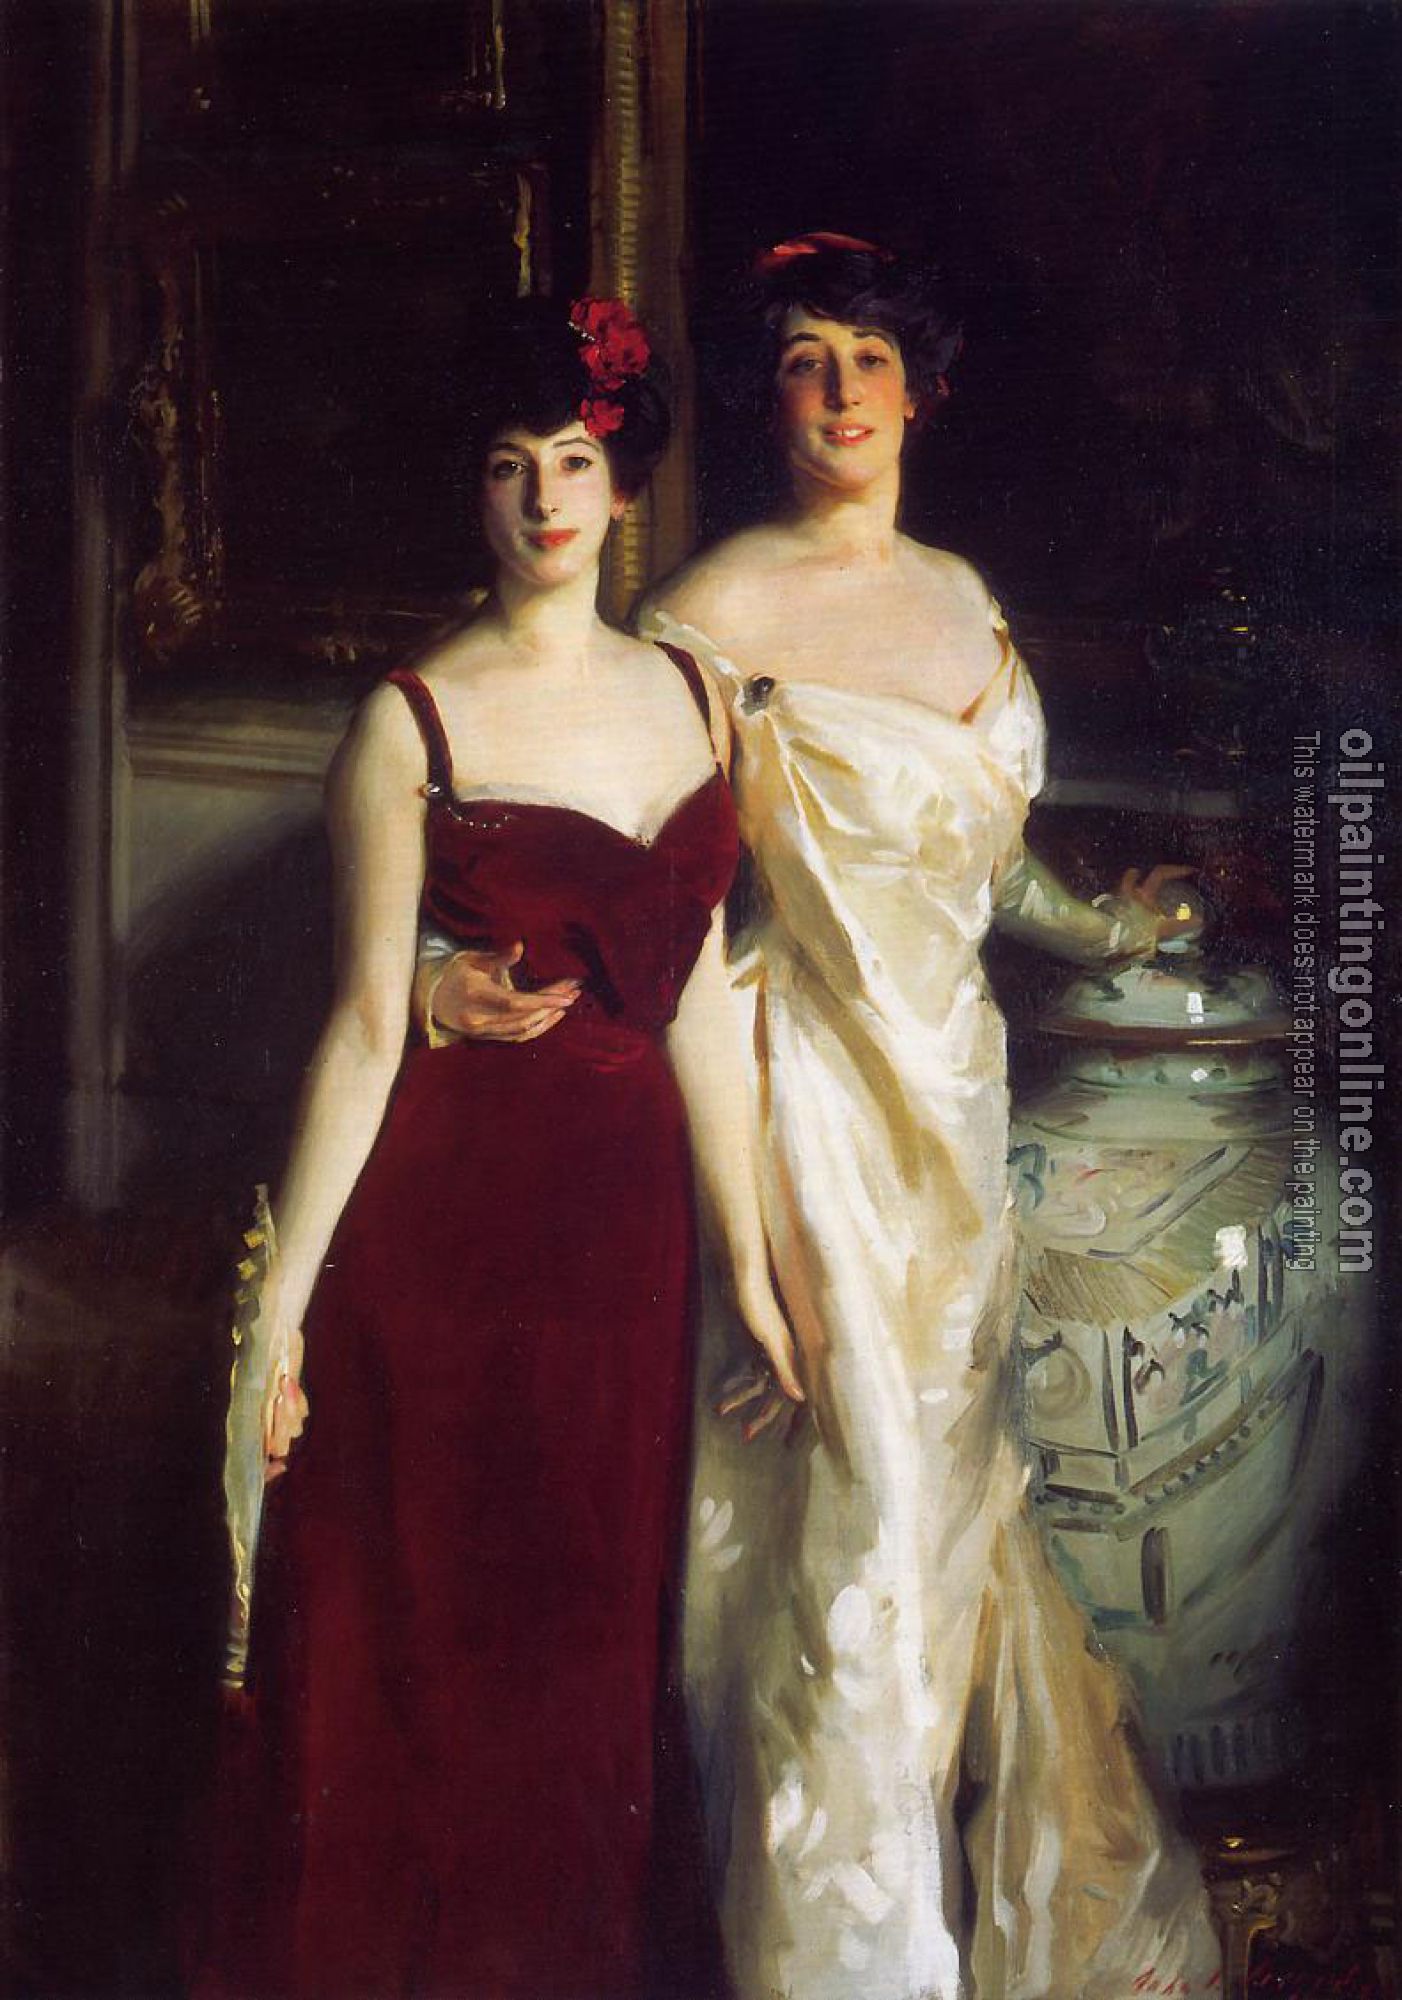 Sargent, John Singer - Ena and Betty, Daughters of Asher and Mrs. Wertheimer